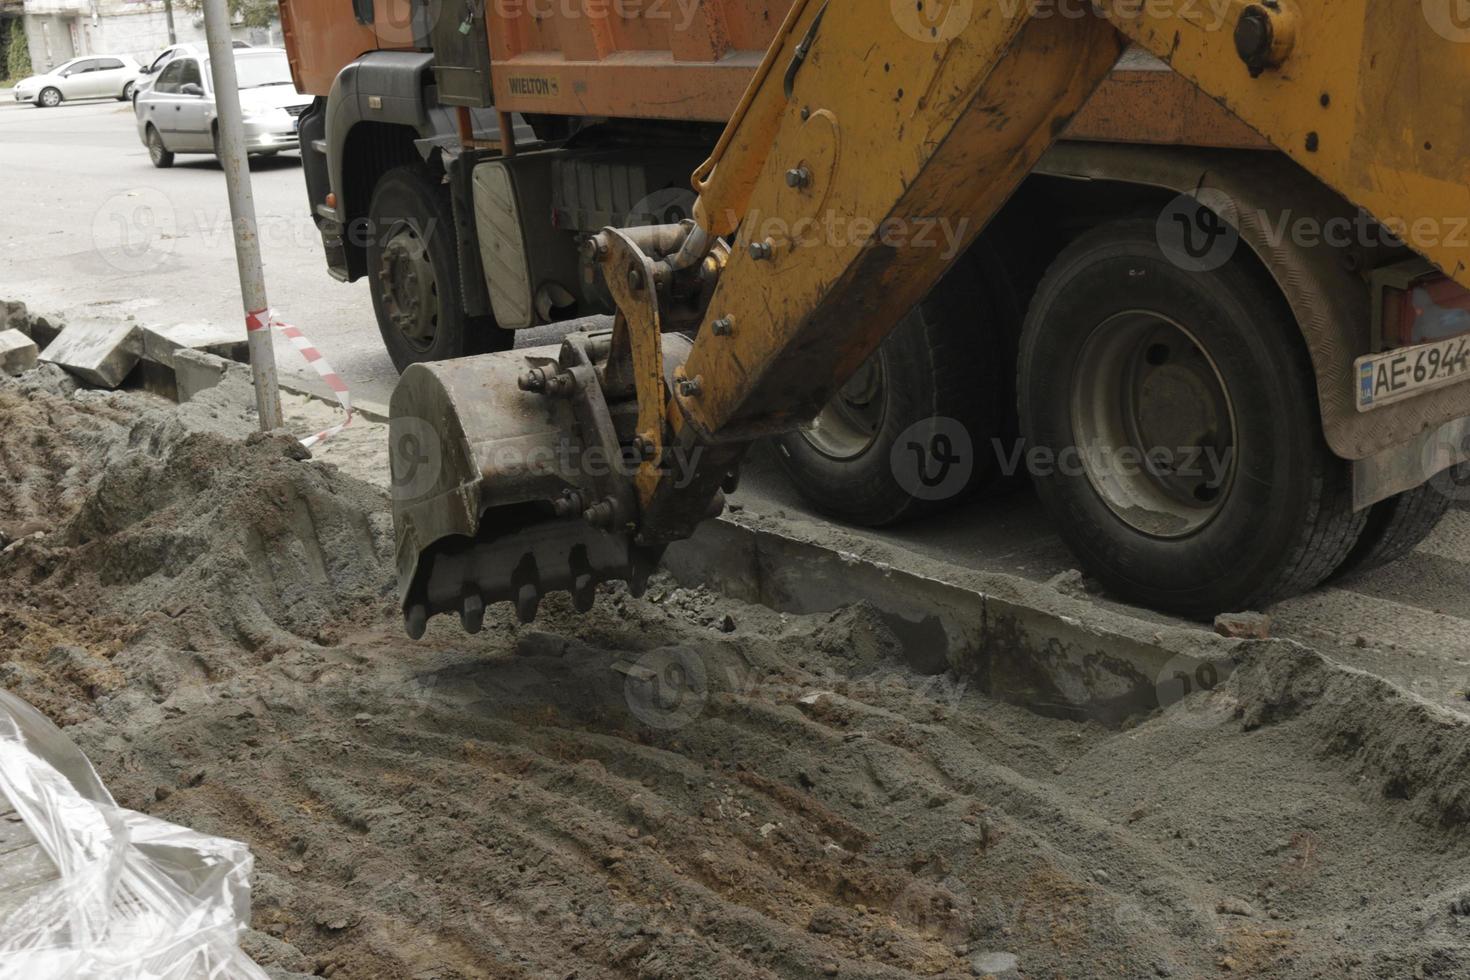 Road works on the city street. The excavator bucket collects the old pavement and loads it into a dump truck. photo